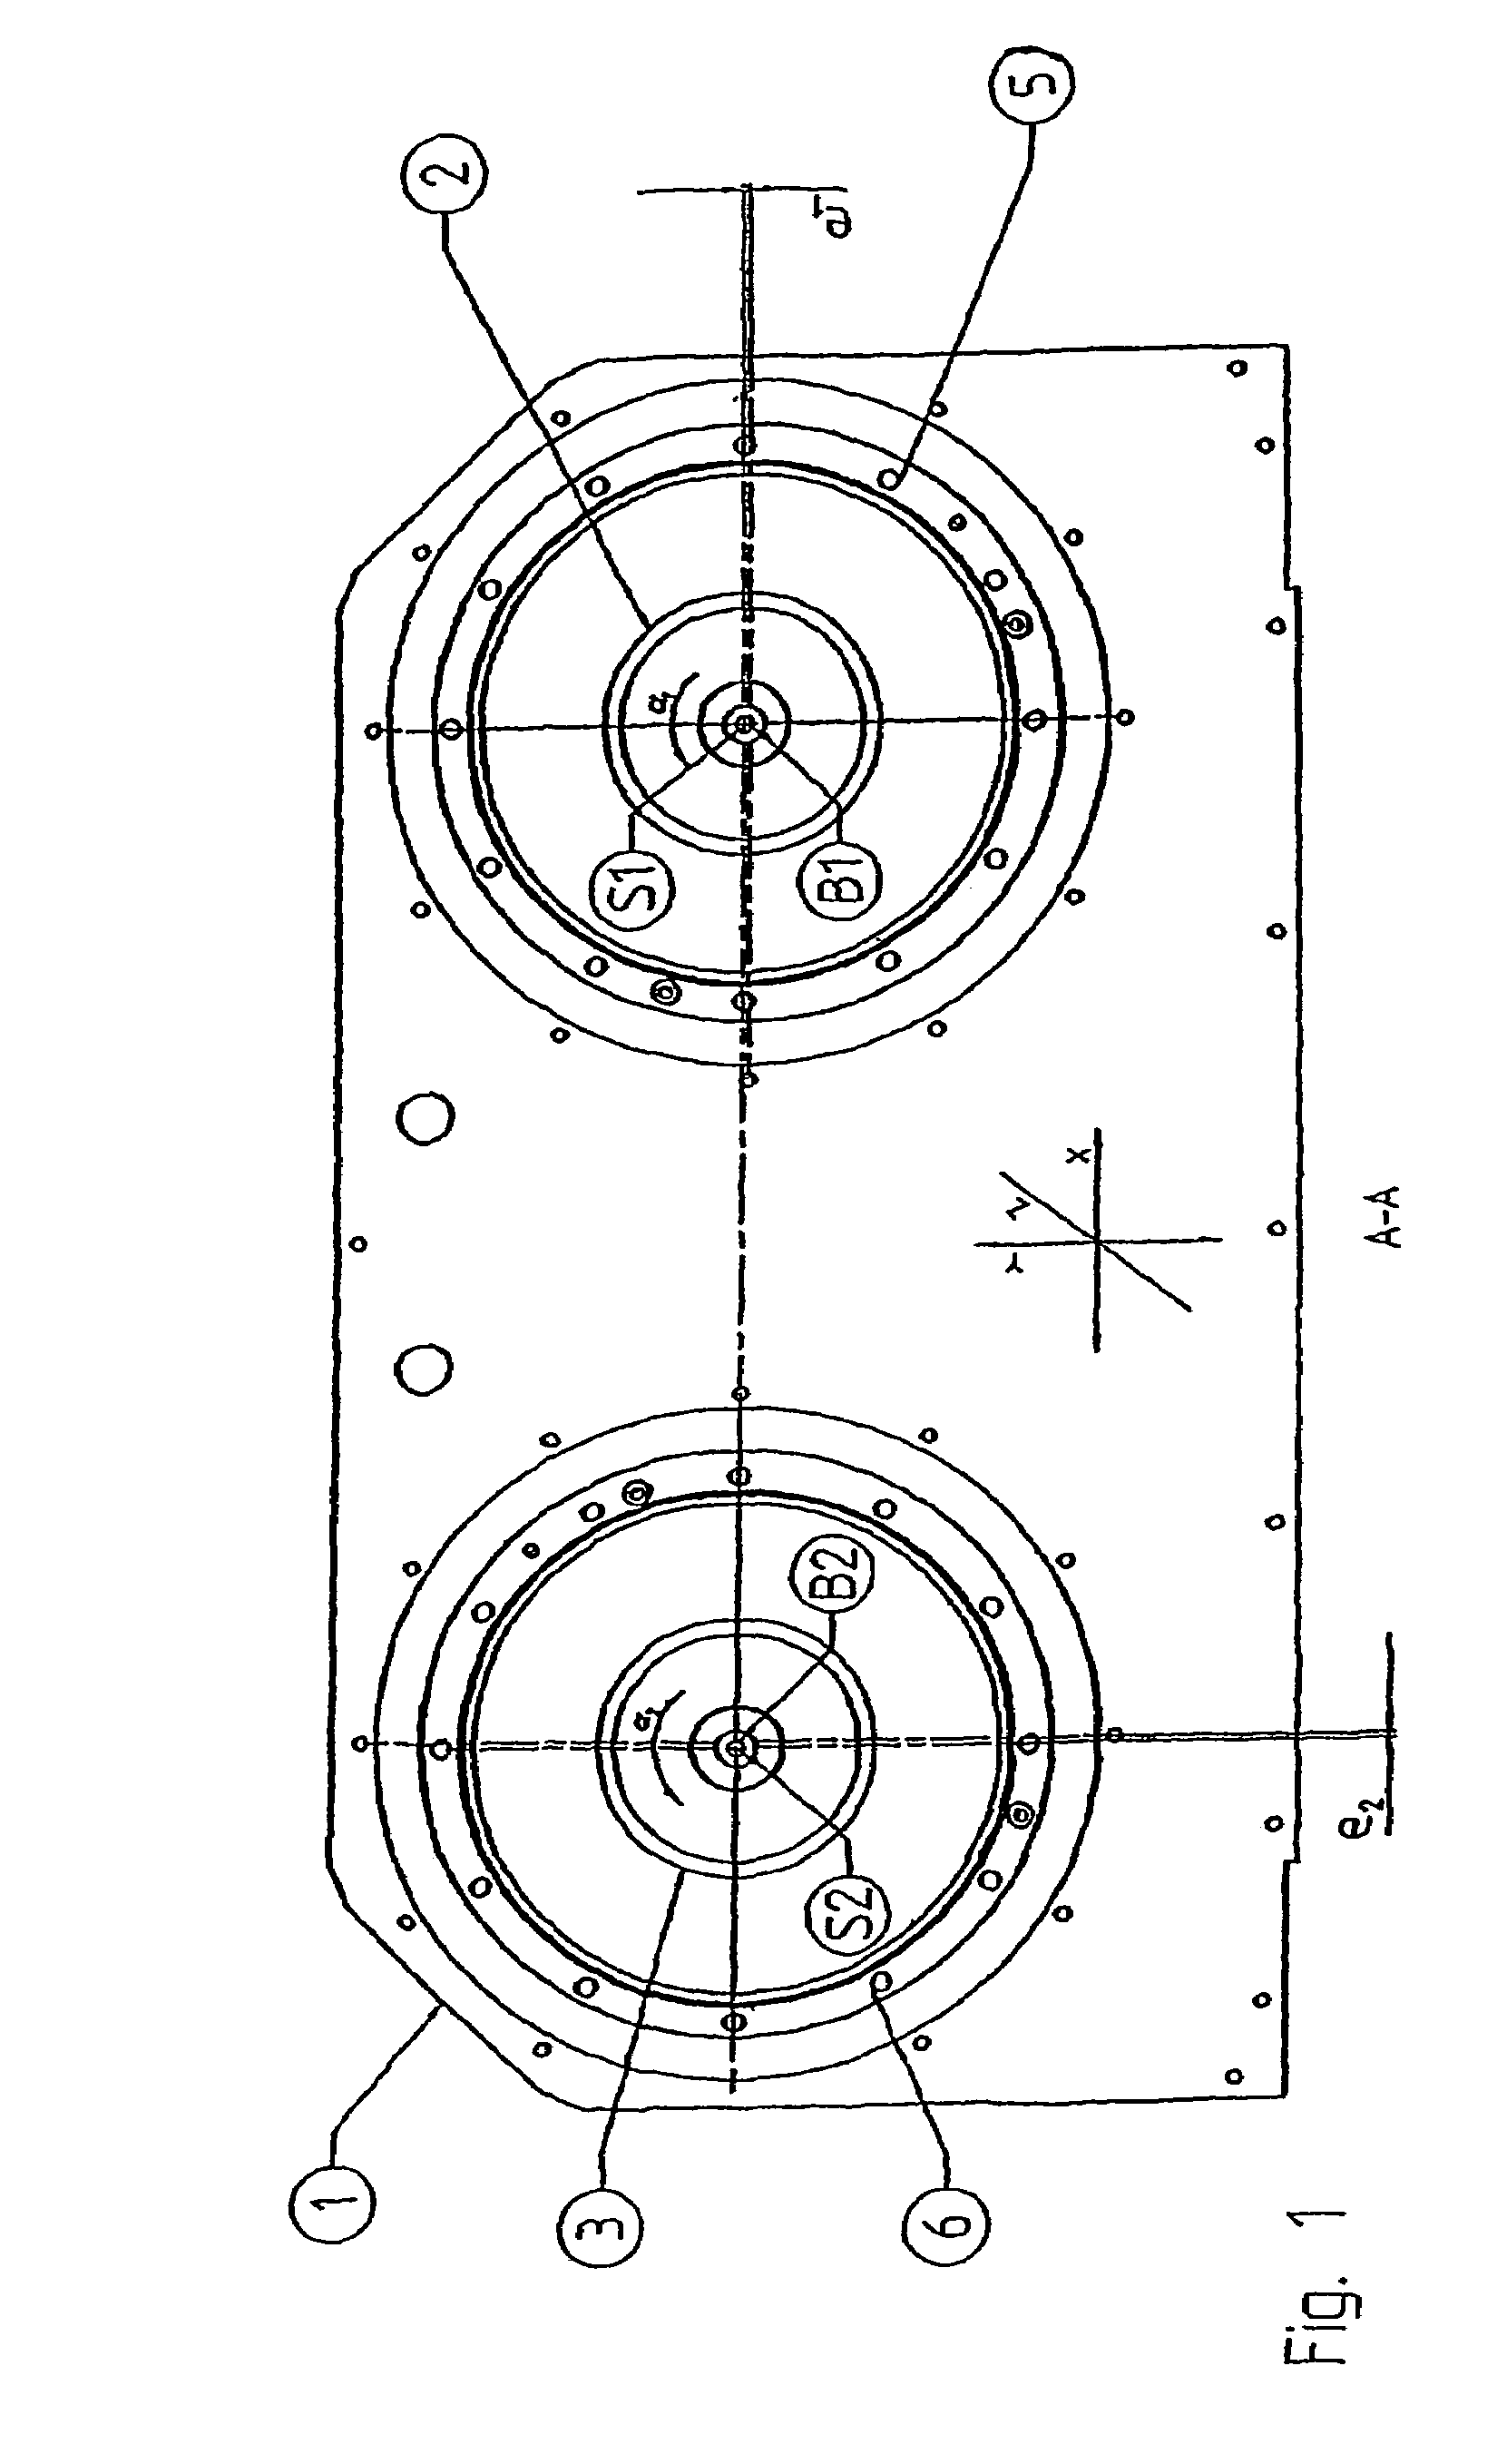 Machine tool comprising parallel tool spindles that can be repositioned in relation to one another